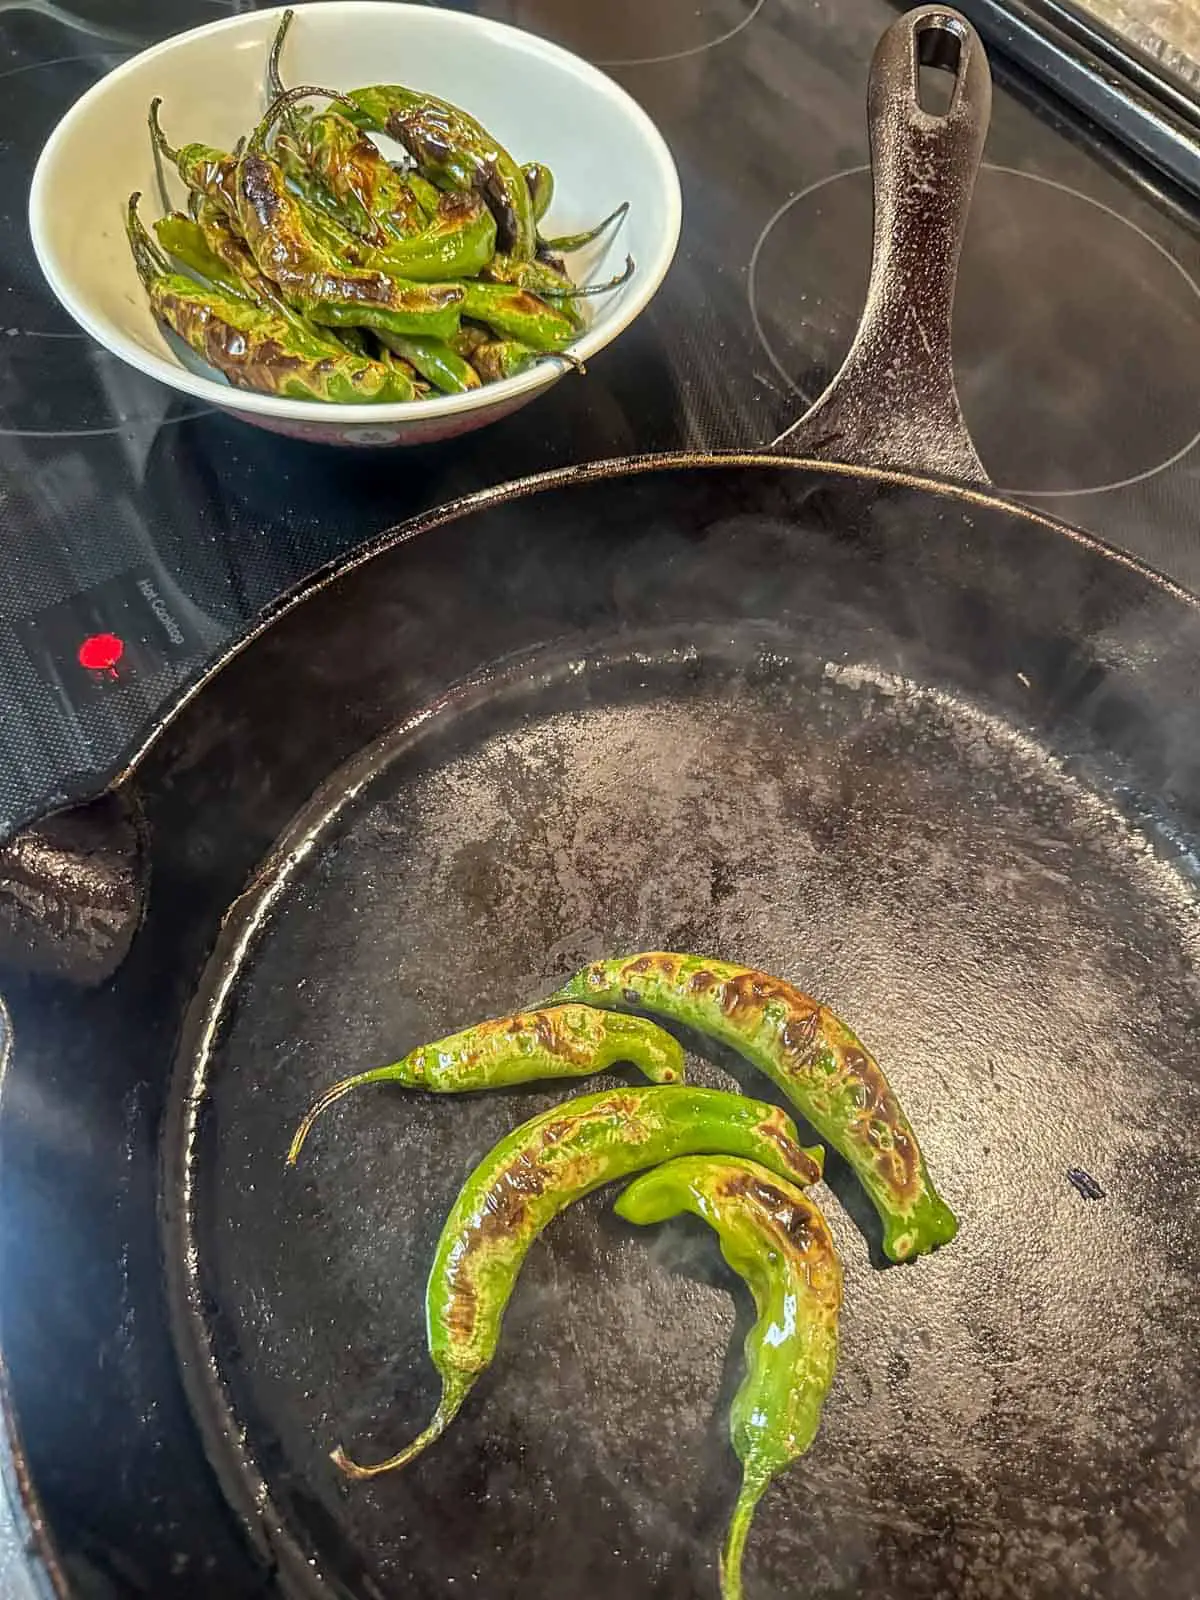 A cast iron pan containing some blistered shishito peppers on a stove. There is a small bowl containing some additional shishito peppers.